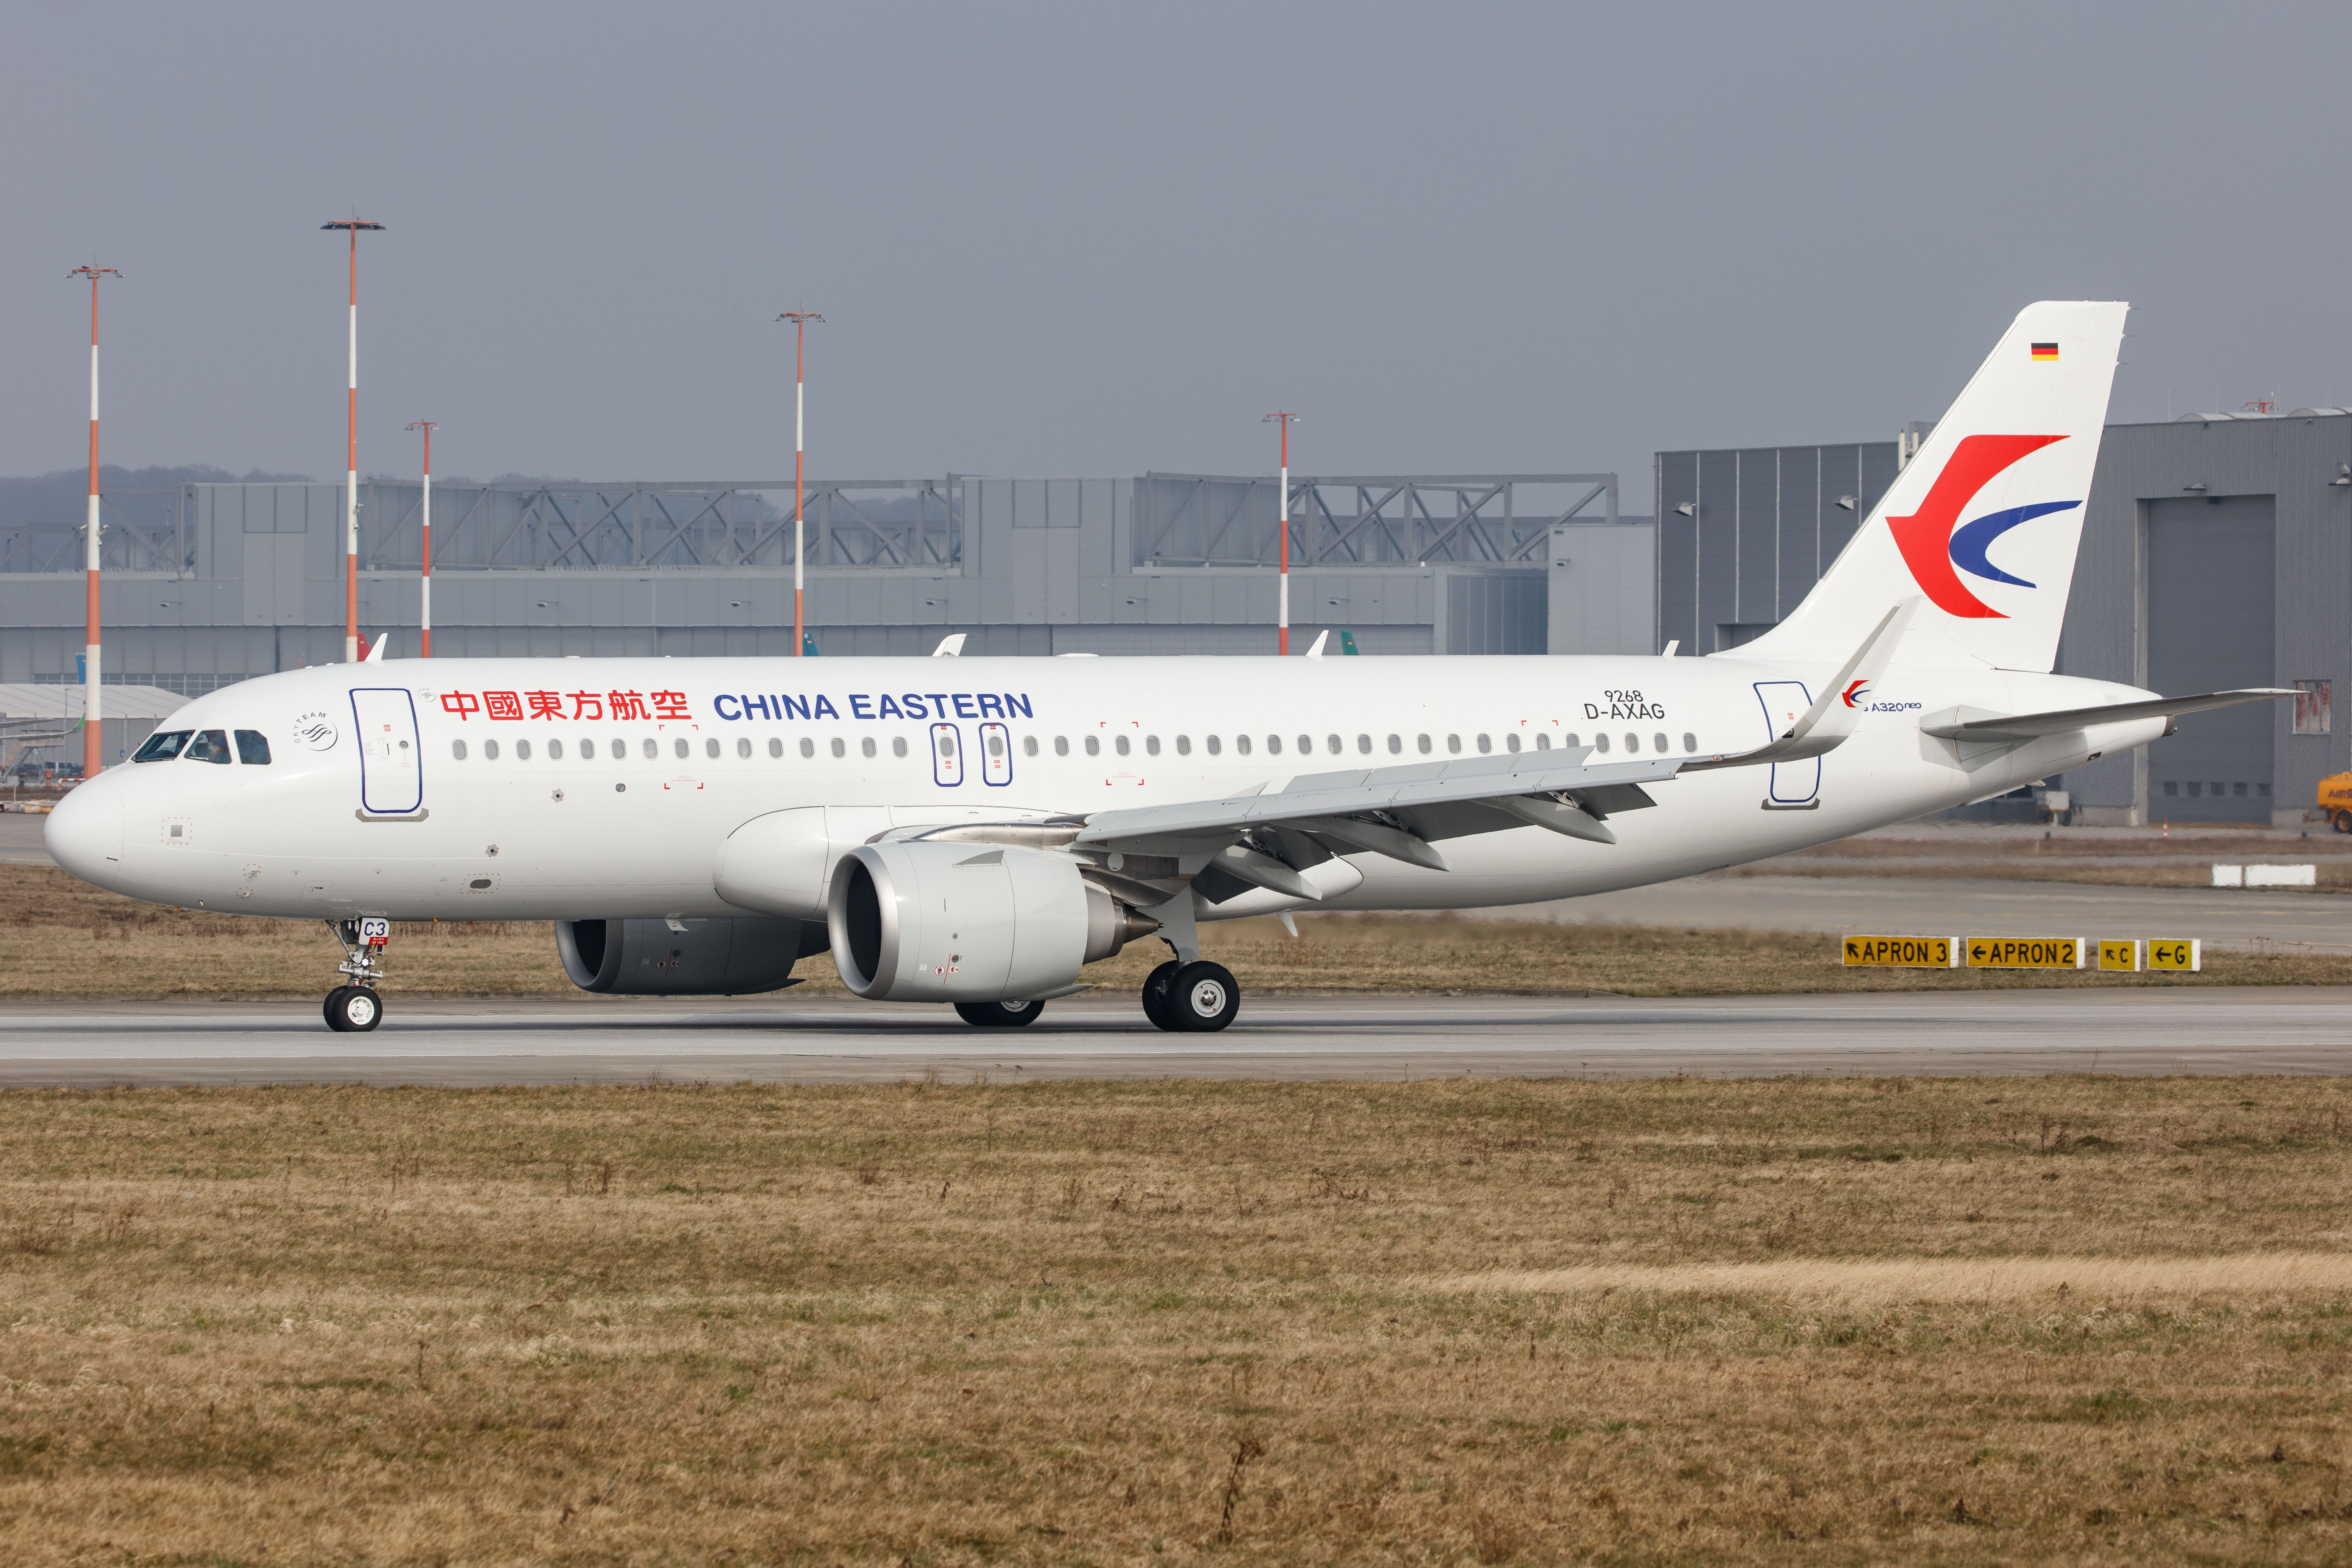 China Eastern A320-200 on ground